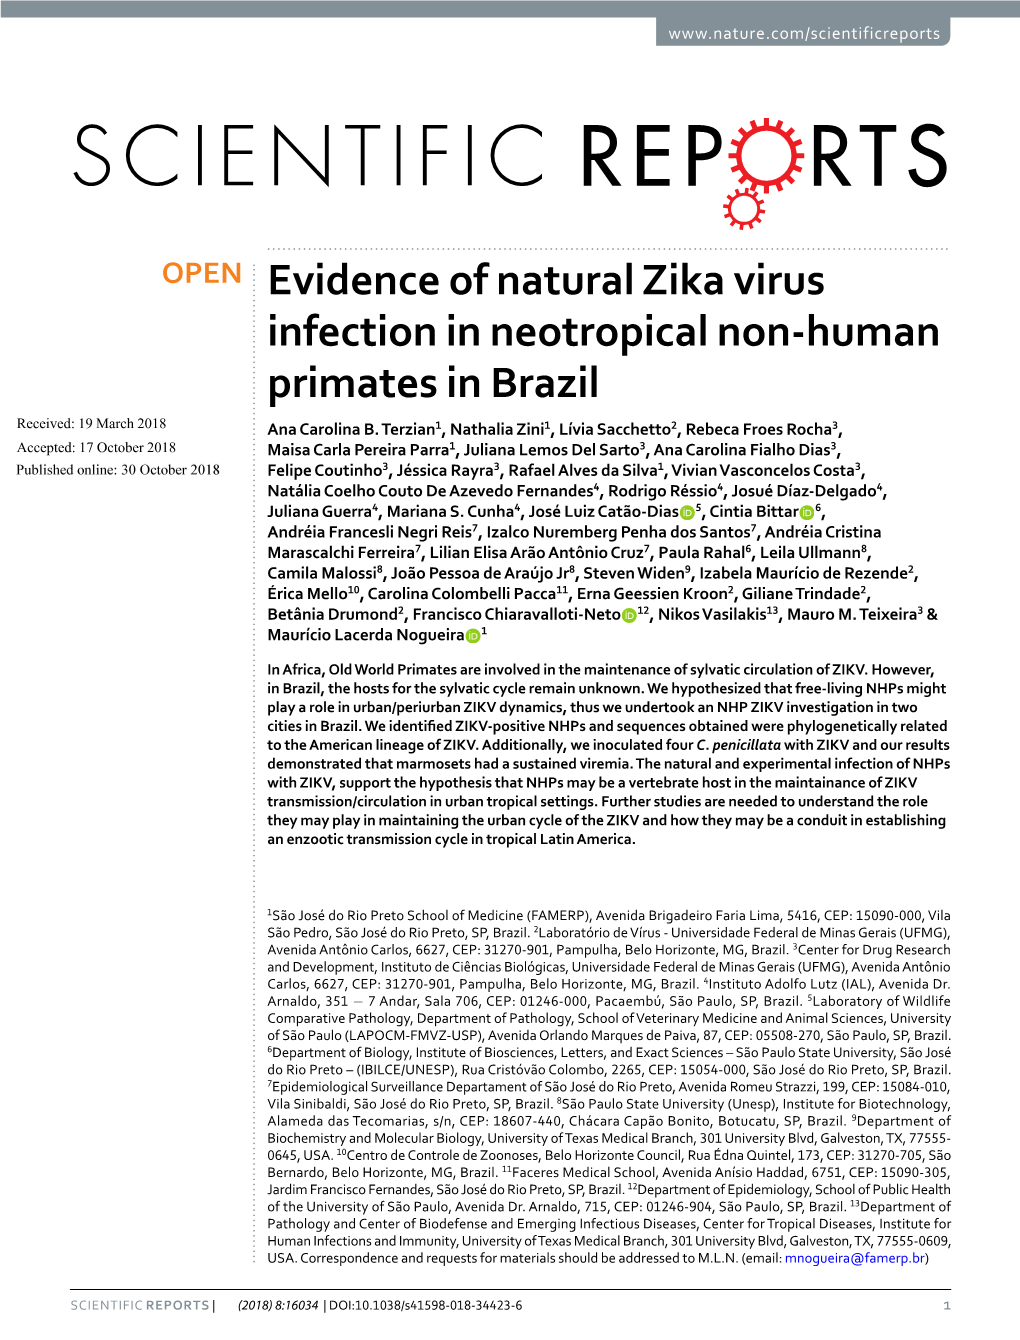 Evidence of Natural Zika Virus Infection in Neotropical Non-Human Primates in Brazil Received: 19 March 2018 Ana Carolina B